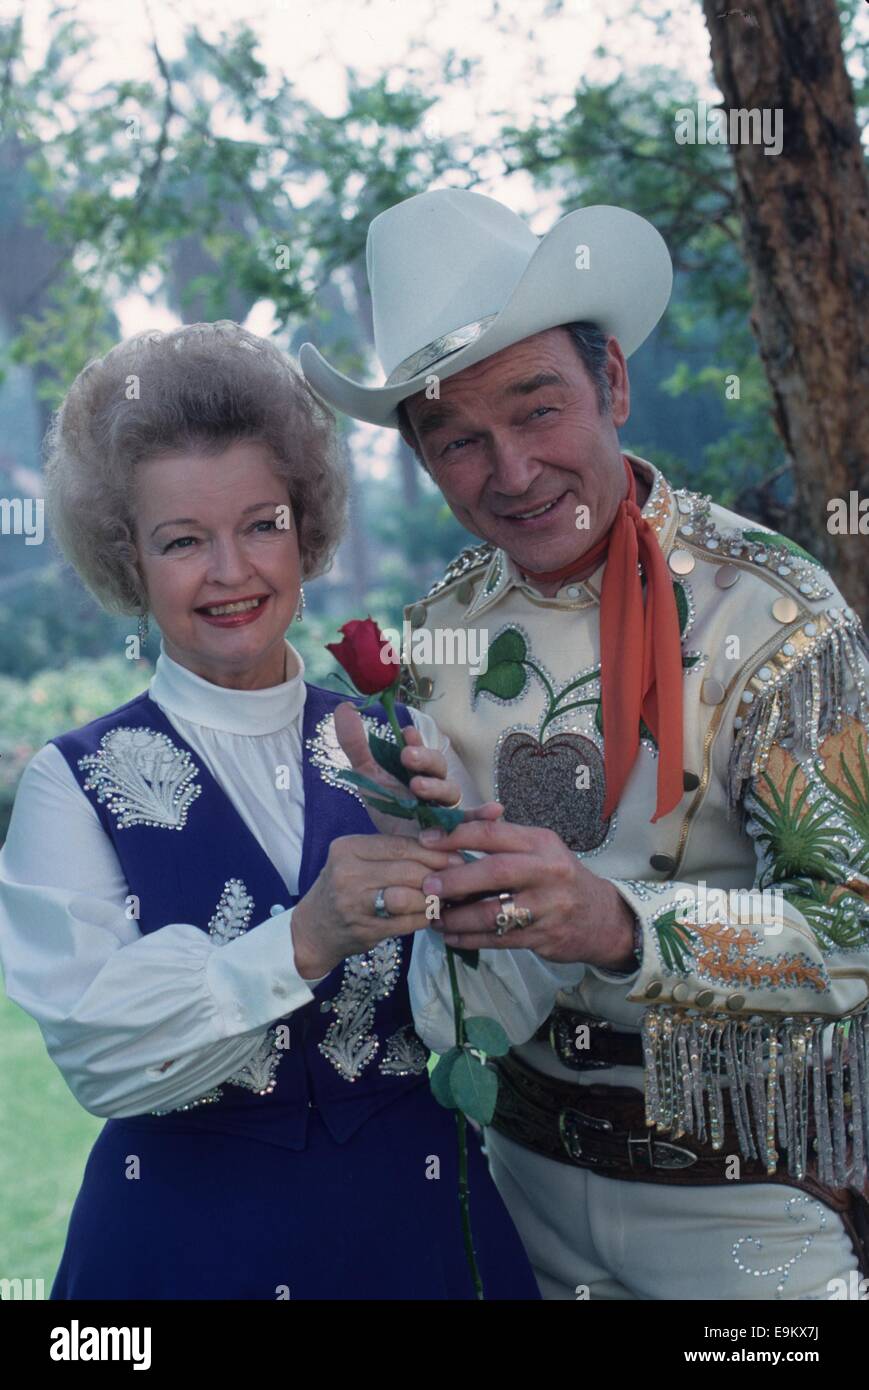 Roy Rogers And Dale Evans Stock Photos & Roy Rogers And Dale Evans ...